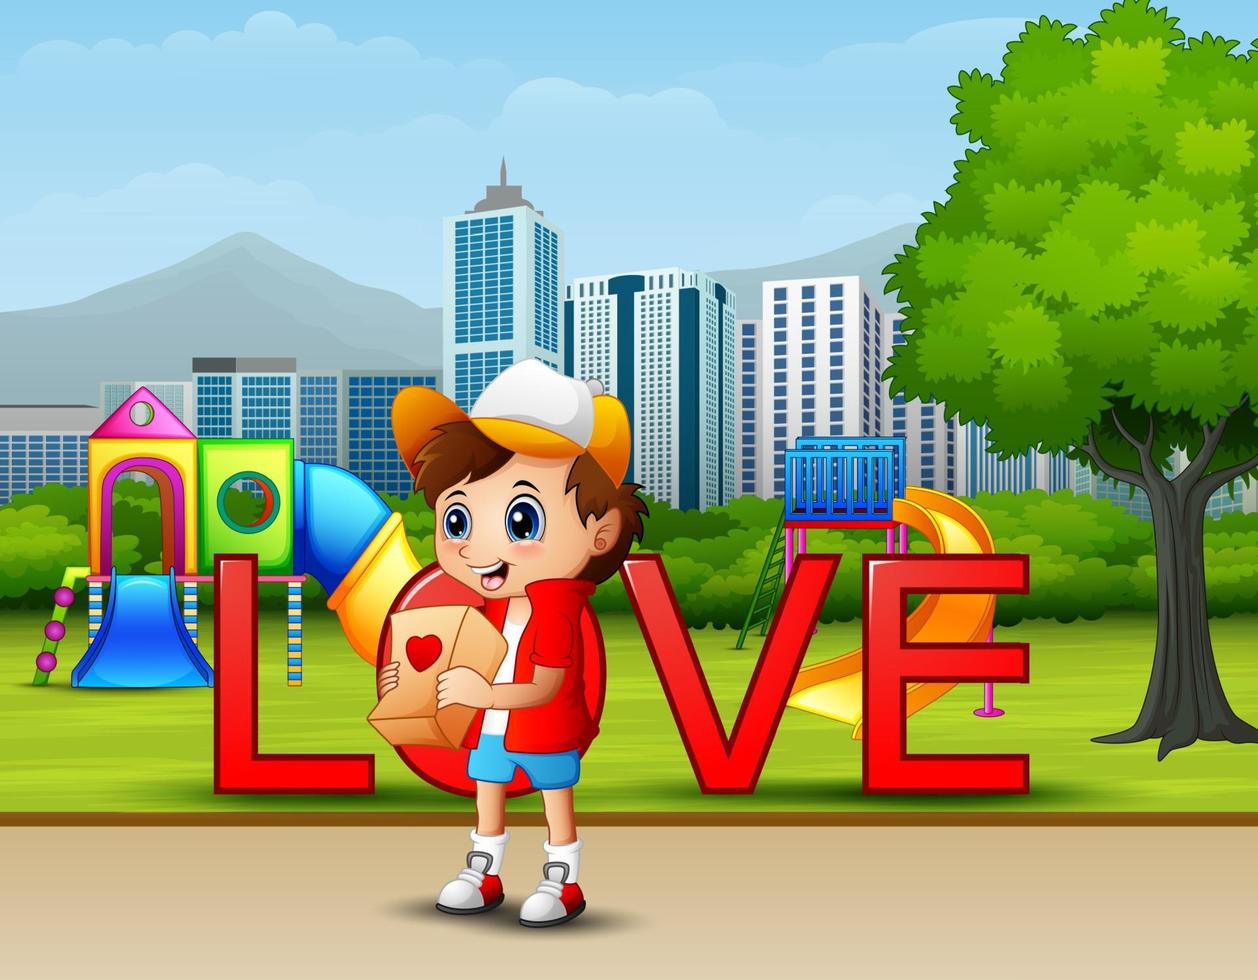 A boy giving gift packages for his girlfrind in the park vector